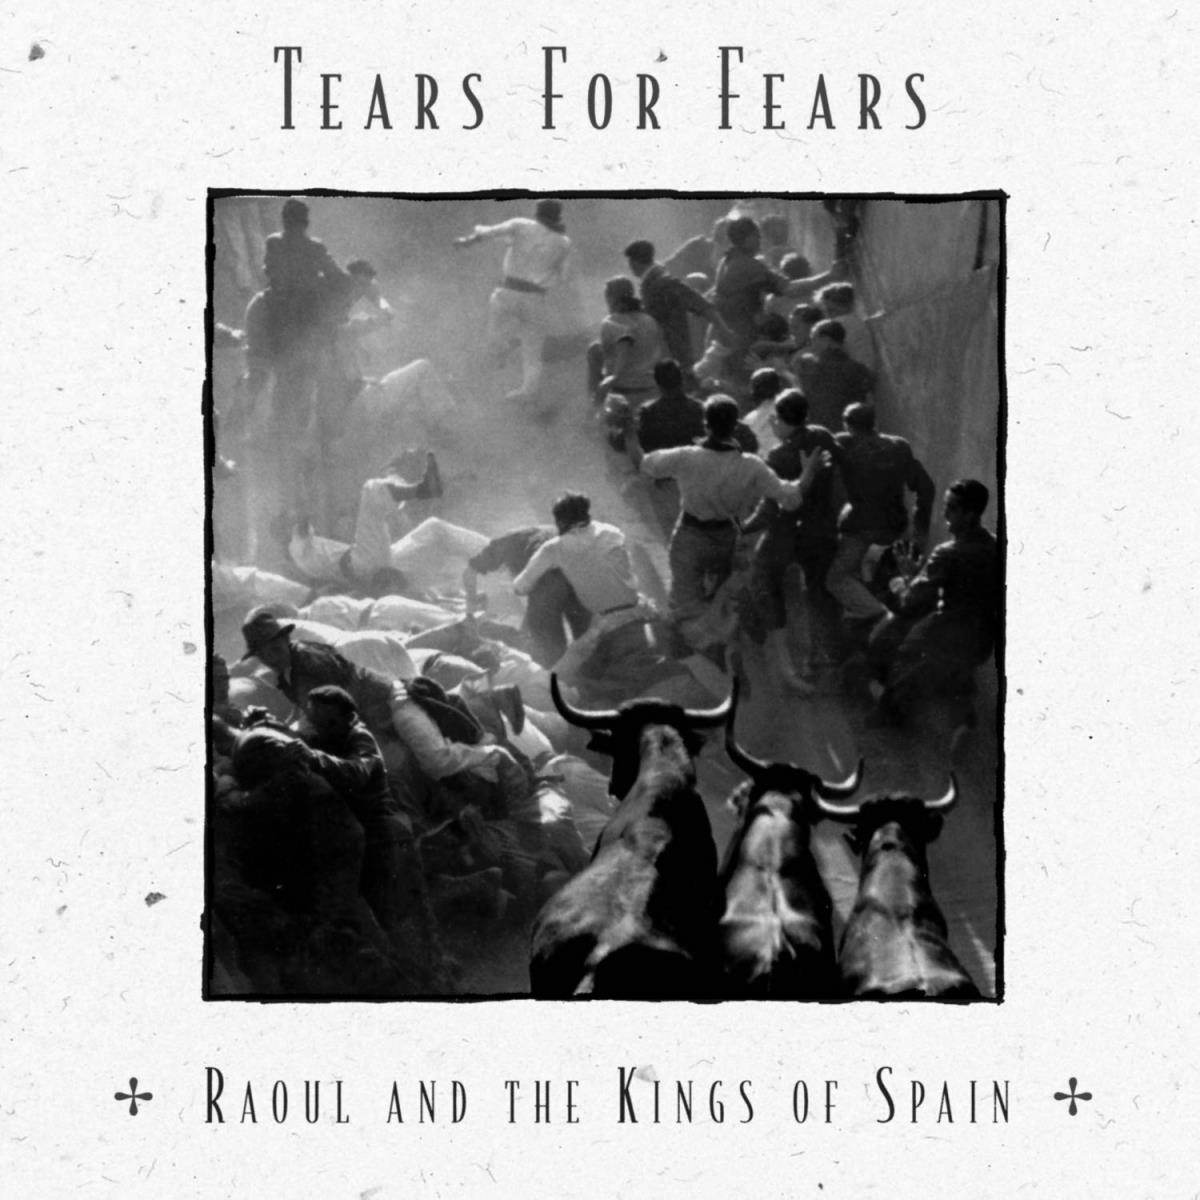 <p>In 1995, <a href="https://www.allmusic.com/album/raoul-and-the-kings-of-spain-mw0000176782" class="CMY_Link CMY_Valid">Orzabal released the second Tears For Fears album</a> since the split with Smith. <em>Raoul and the Kings of Spain</em>, co-written again with Alan Griffiths, was a move toward a more progressive rock sound. However, it failed to be a commercial success in the UK or North America.</p>